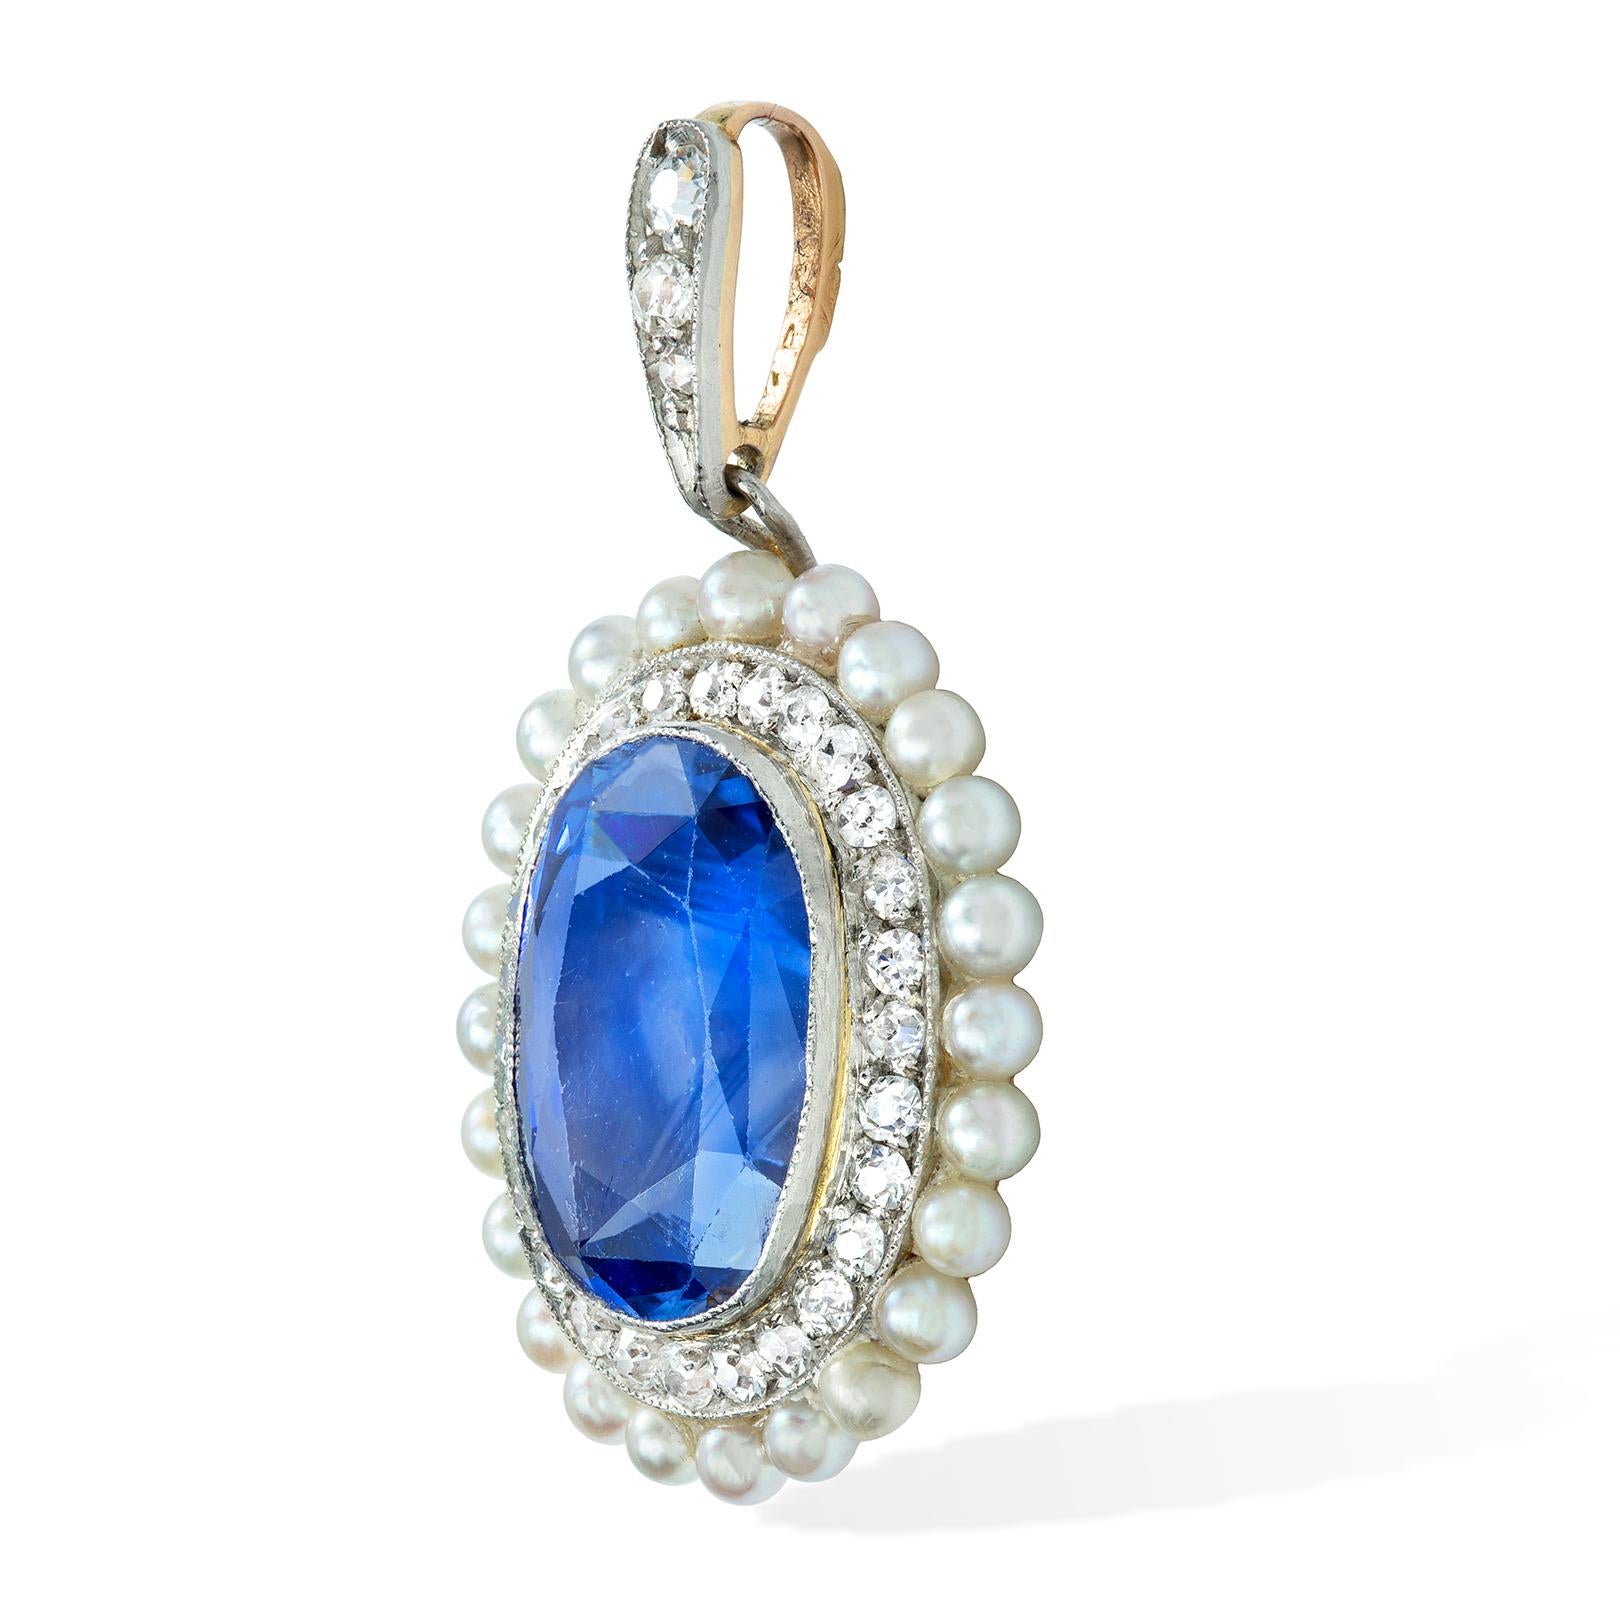 A Belle Époque sapphire diamond and pearl pendant, the oval-cut faceted sapphire weighing approximately 6.60 carats, accompanied by GCS Report 77116-67 stating to be of Sri-Lankan origin, with no indication of heat treatment, surrounded by